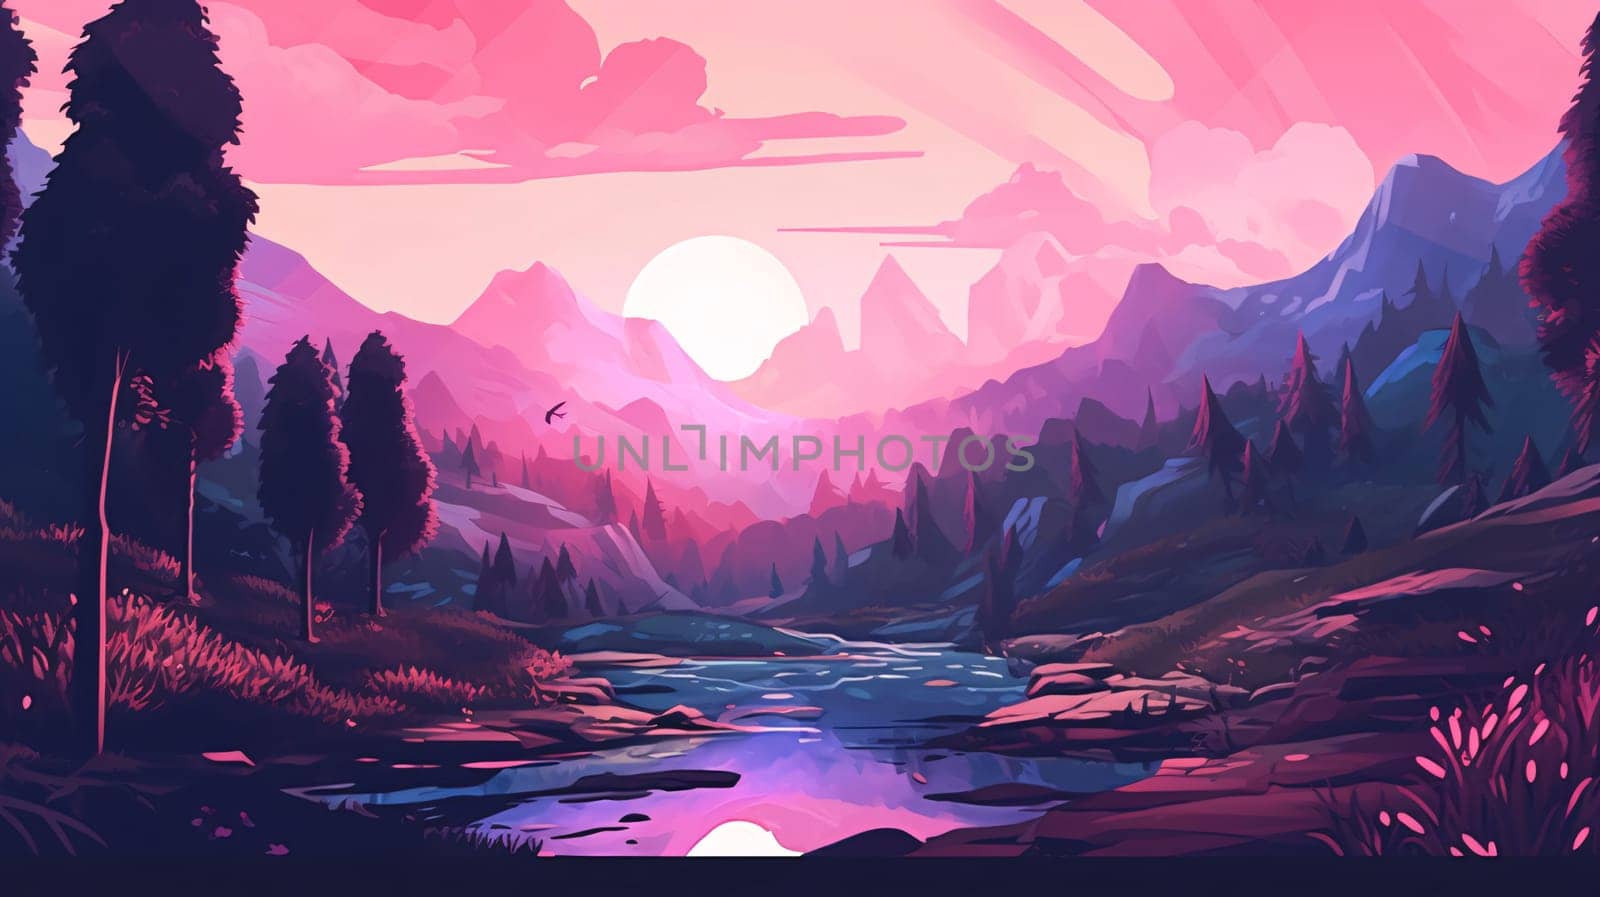 Landscape with mountains, river, forest and sunset. Vector illustration by ThemesS